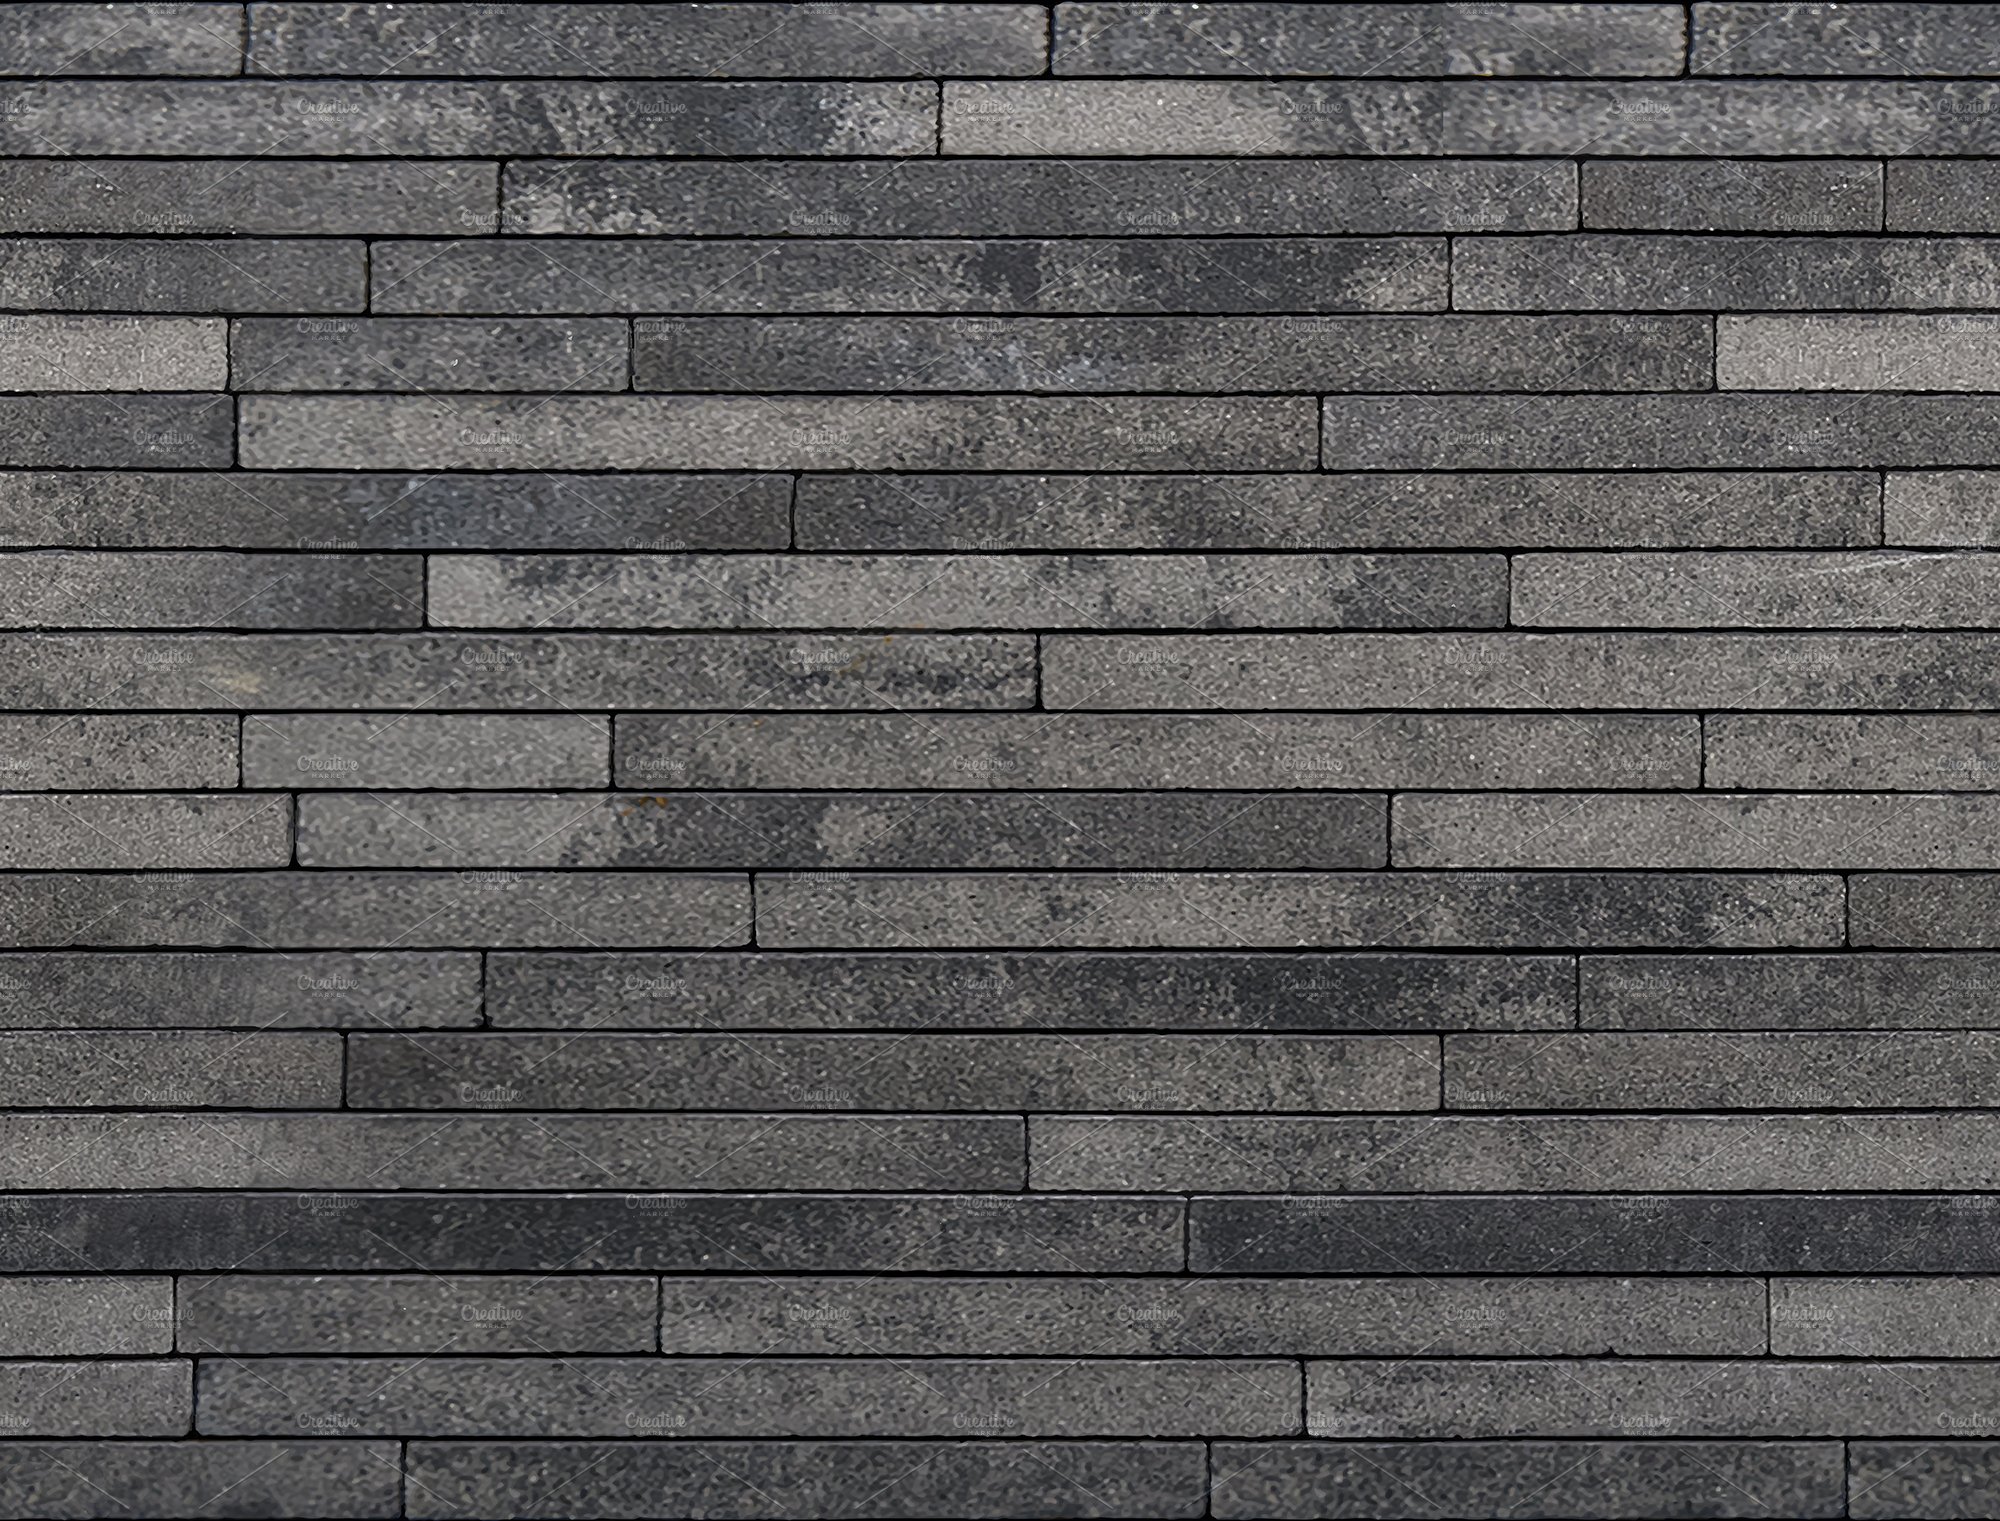 Strip stone wall cladding, texture cover image.